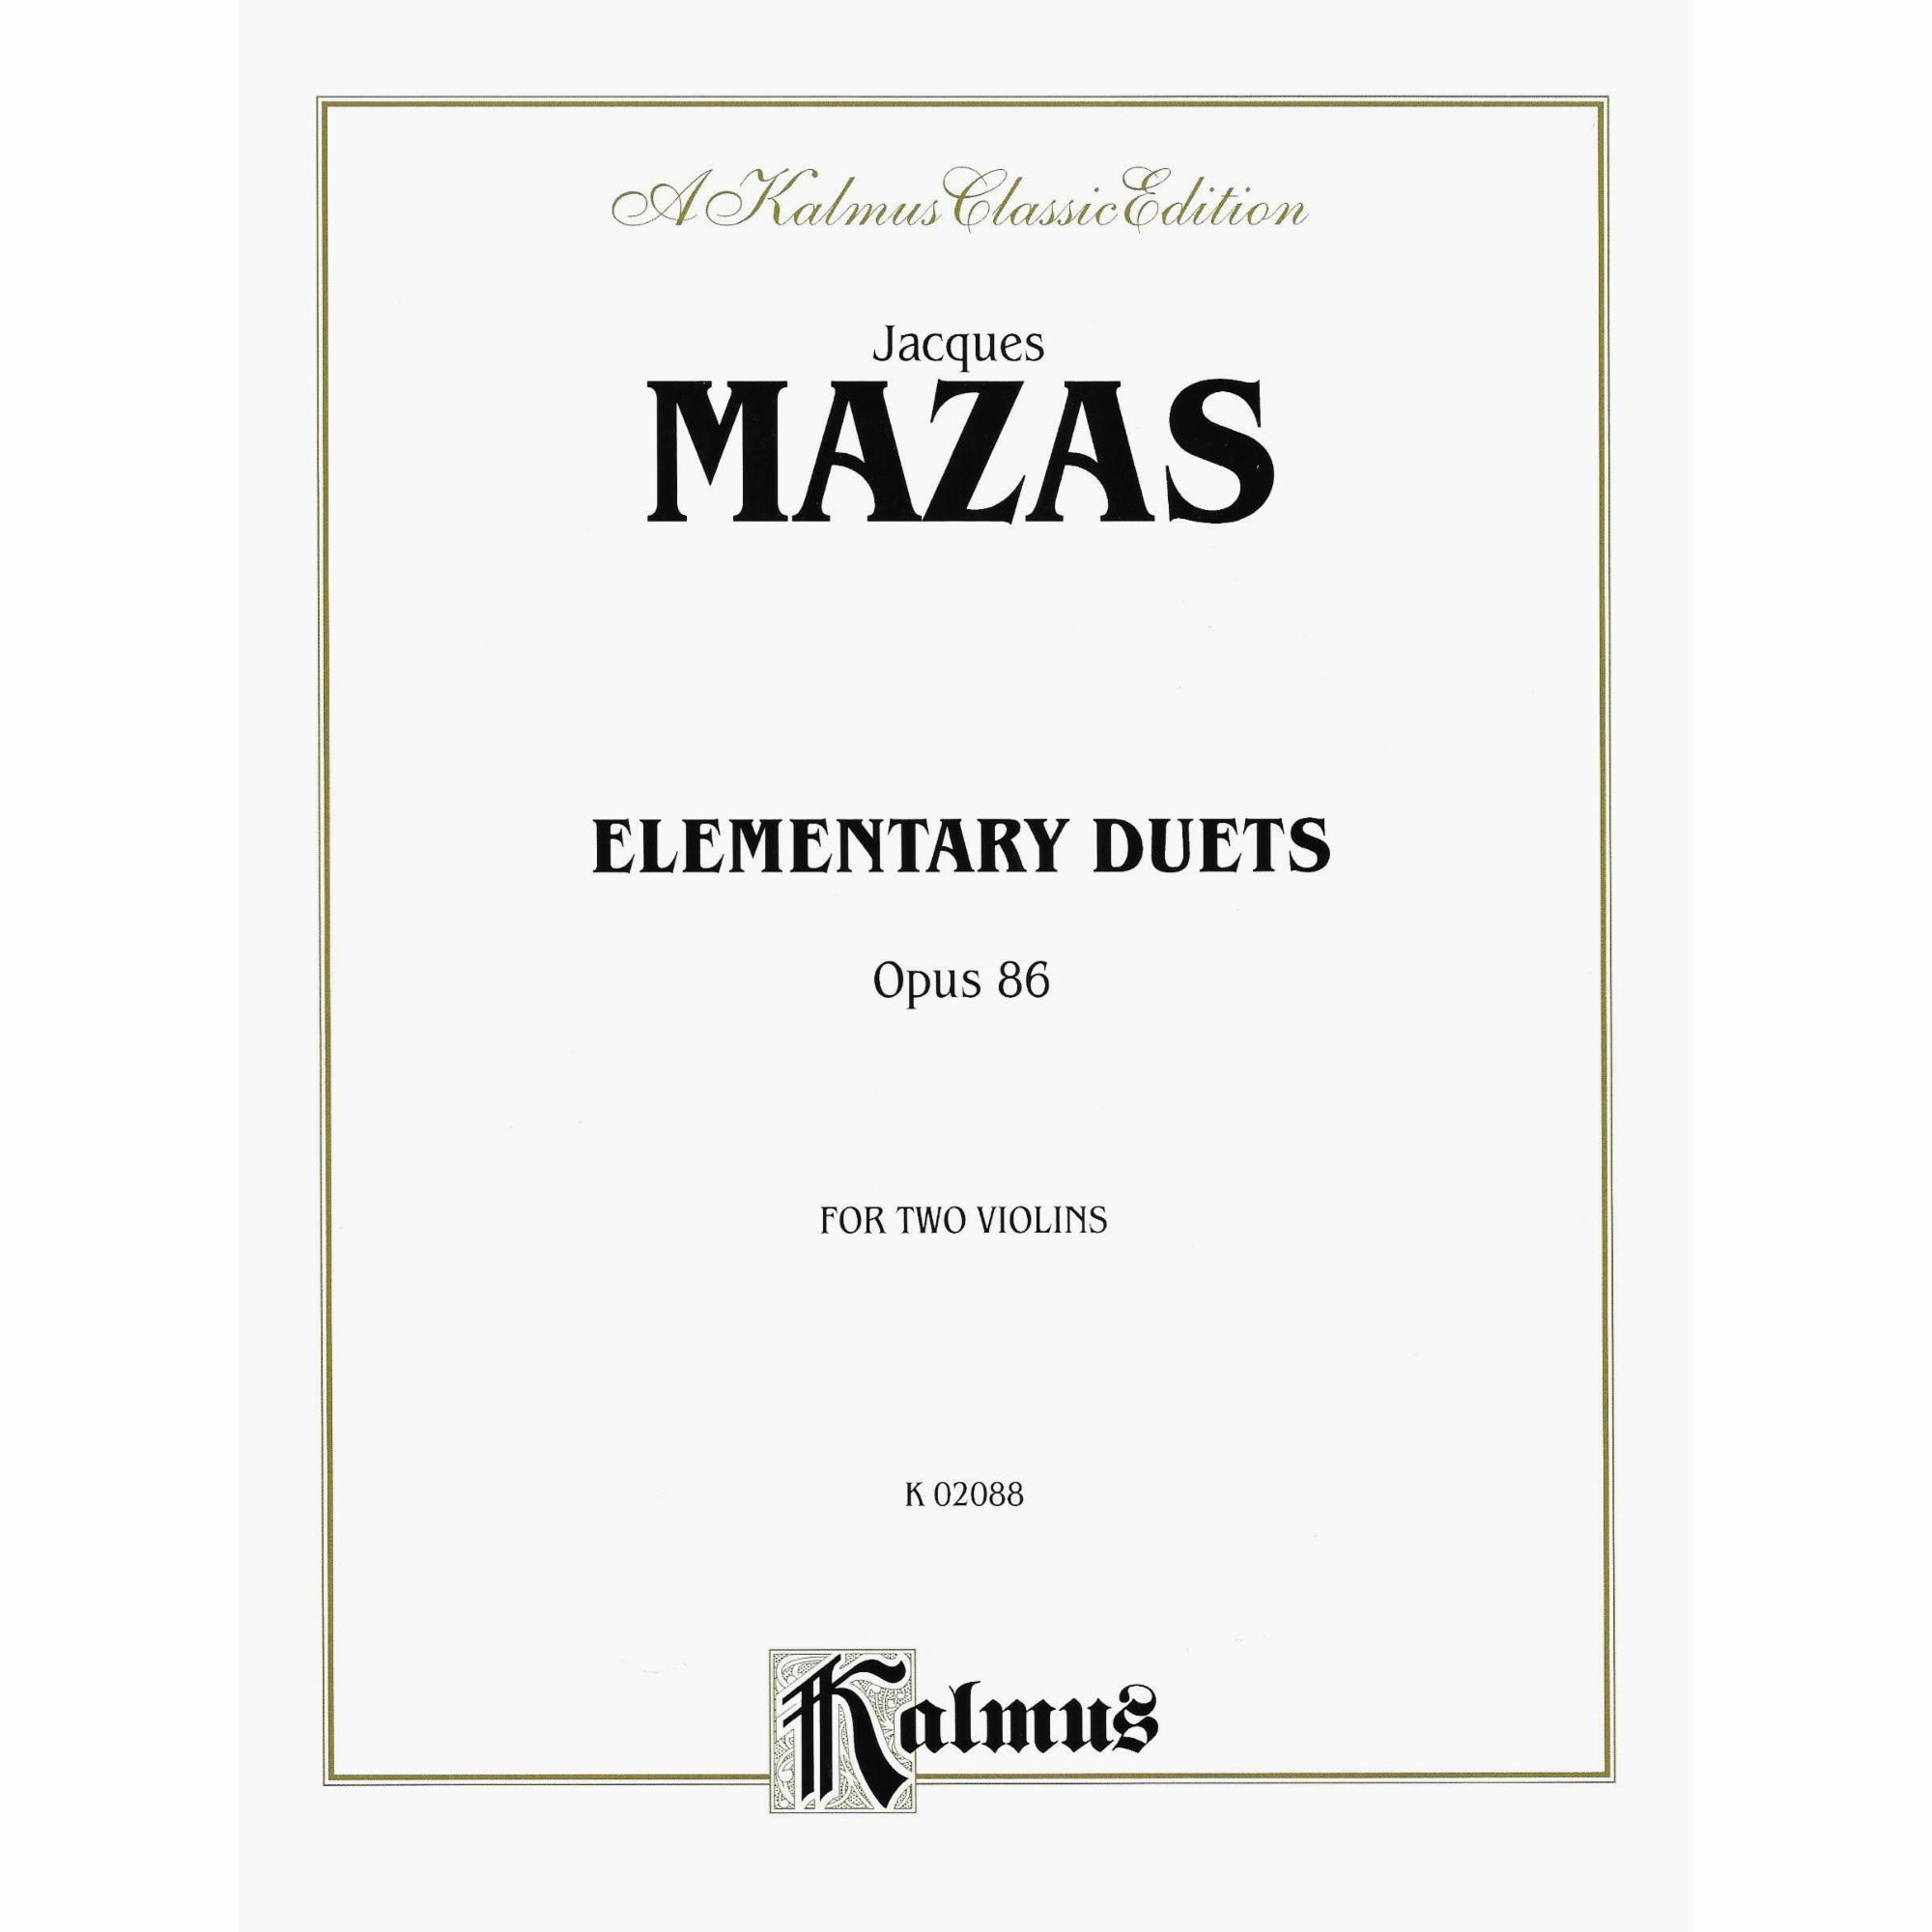 Mazas -- Elementary Duets, Op. 86 for Two Violins